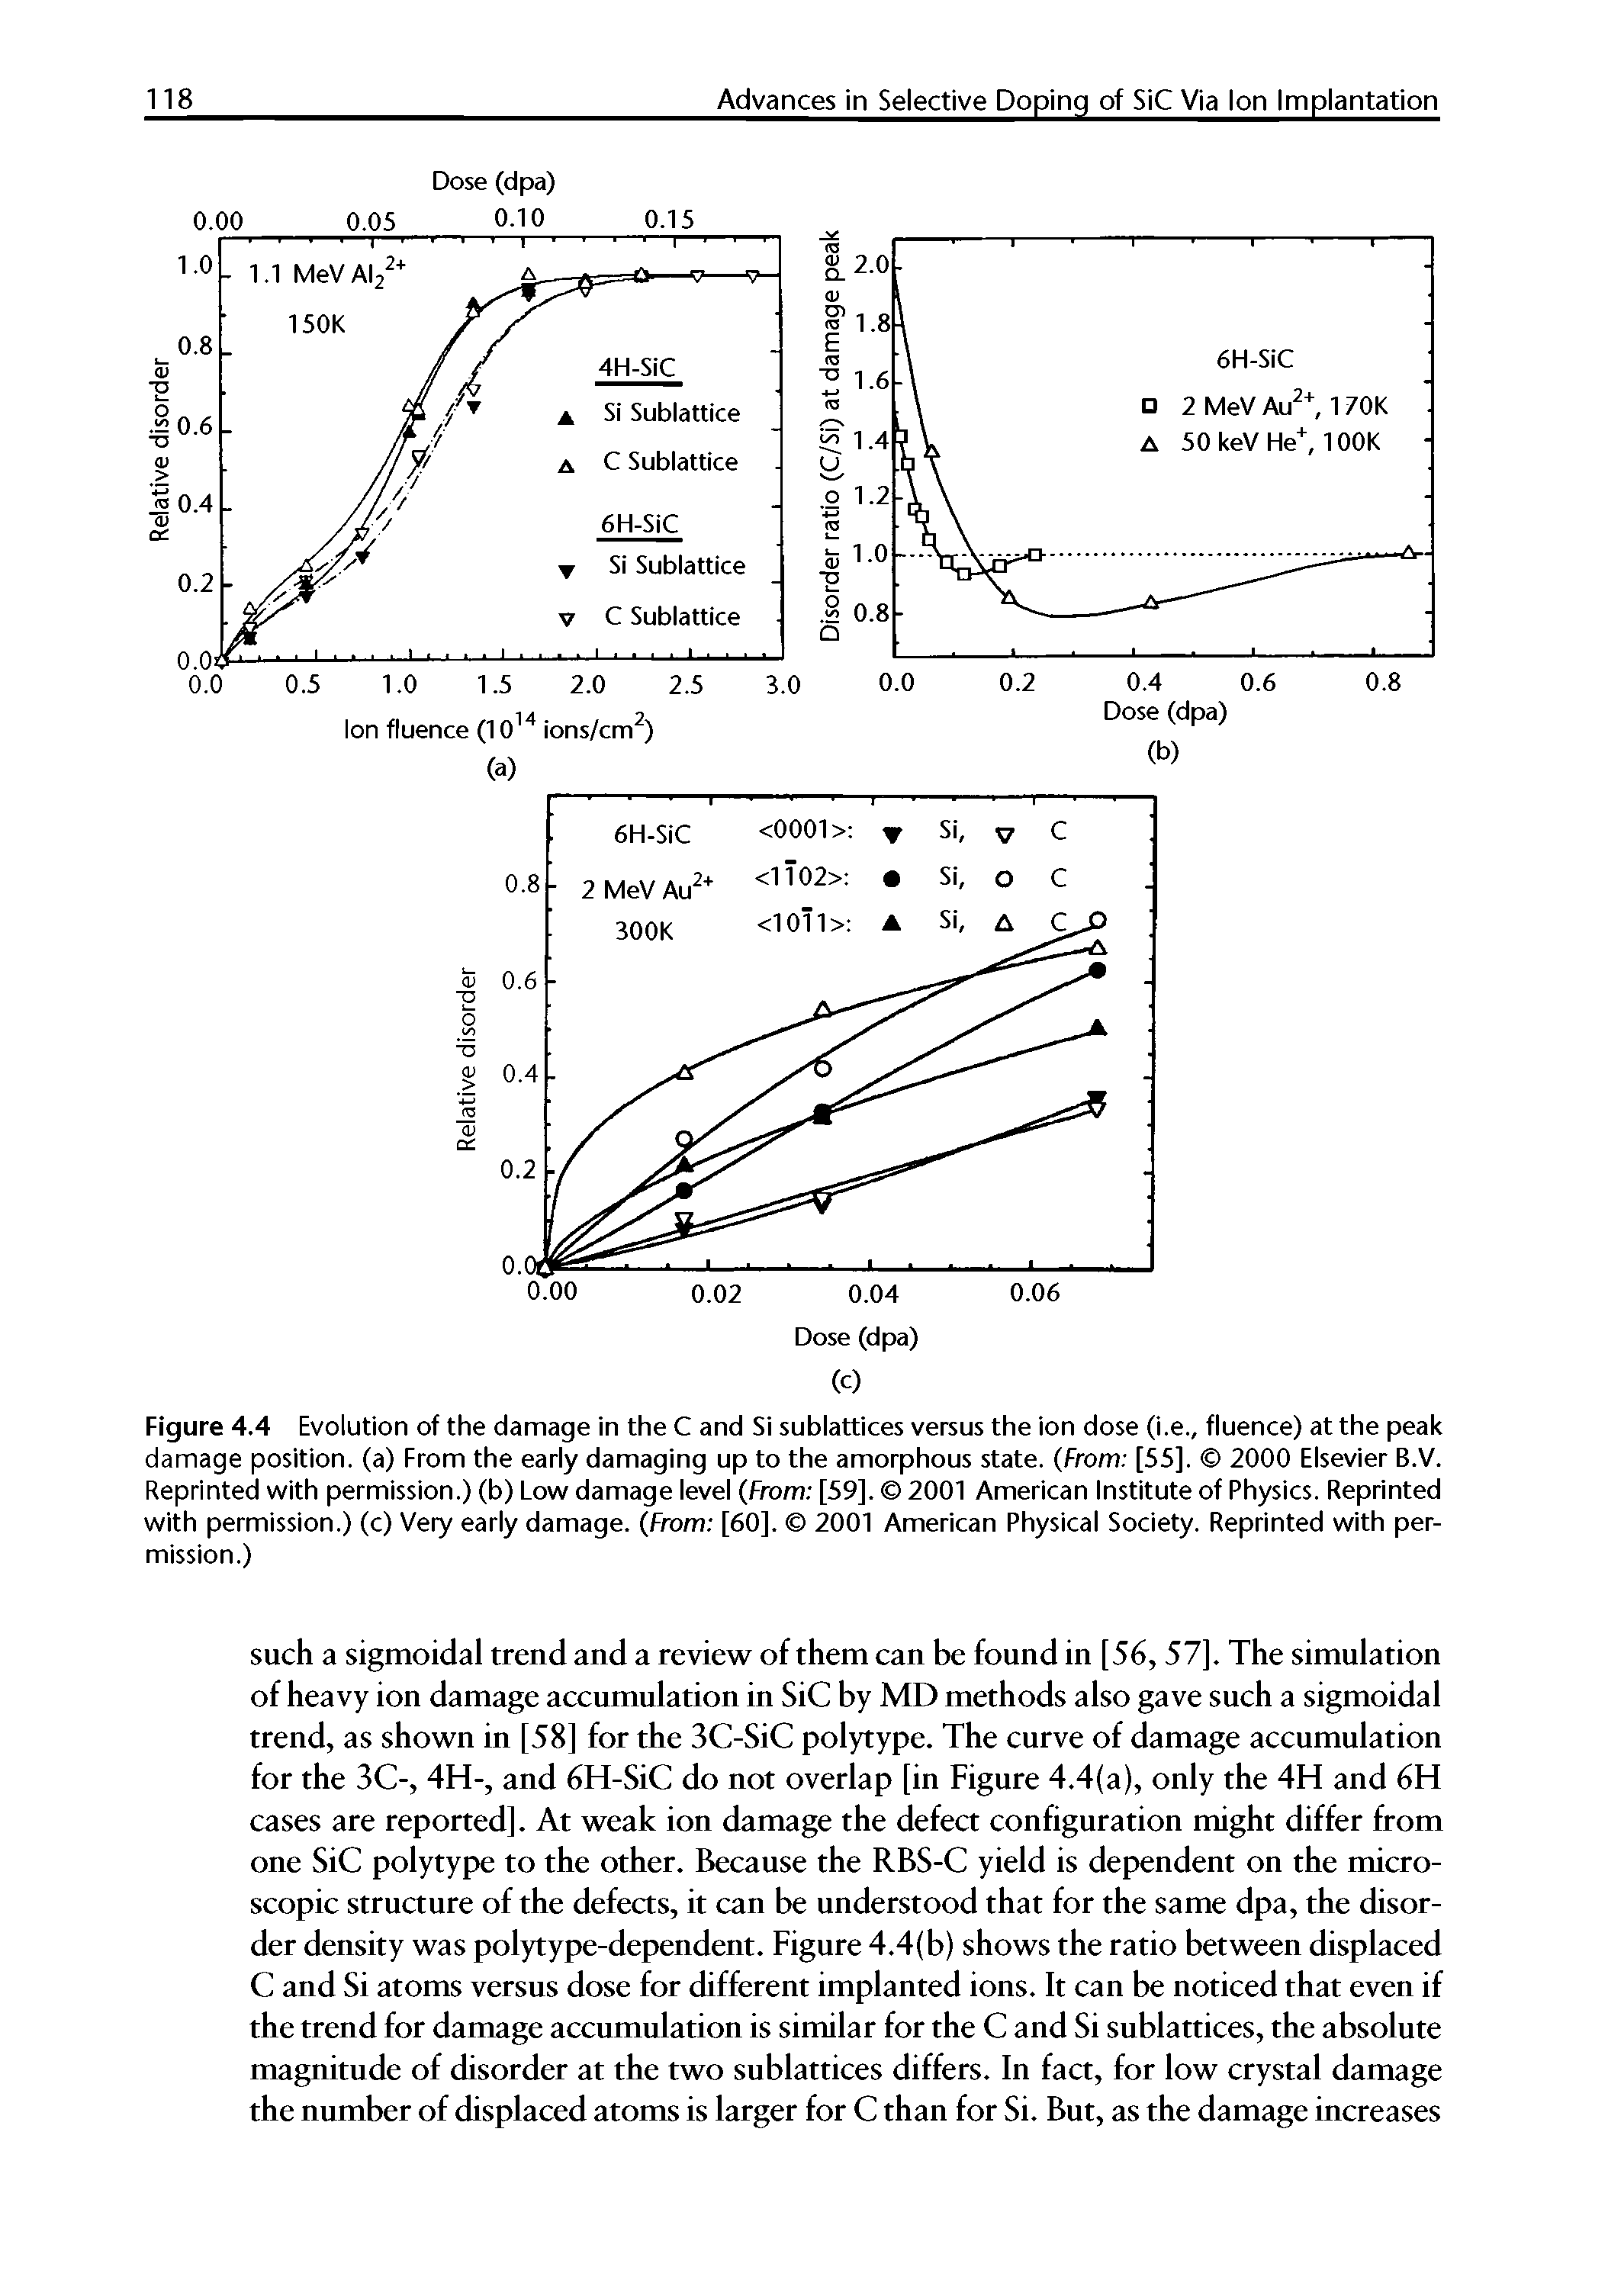 Figure 4.4 Evolution of the damage in the C and Si sublattices versus the ion dose (i.e., fluence) at the peak damage position, (a) From the early damaging up to the amorphous state. (From [55]. 2000 Elsevier B.V. Reprinted with permission.) (b) Low damage level (From [59]. 2001 American Institute of Physics. Reprinted with permission.) (c) Very early damage. (From [60]. 2001 American Physical Society. Reprinted with permission.)...